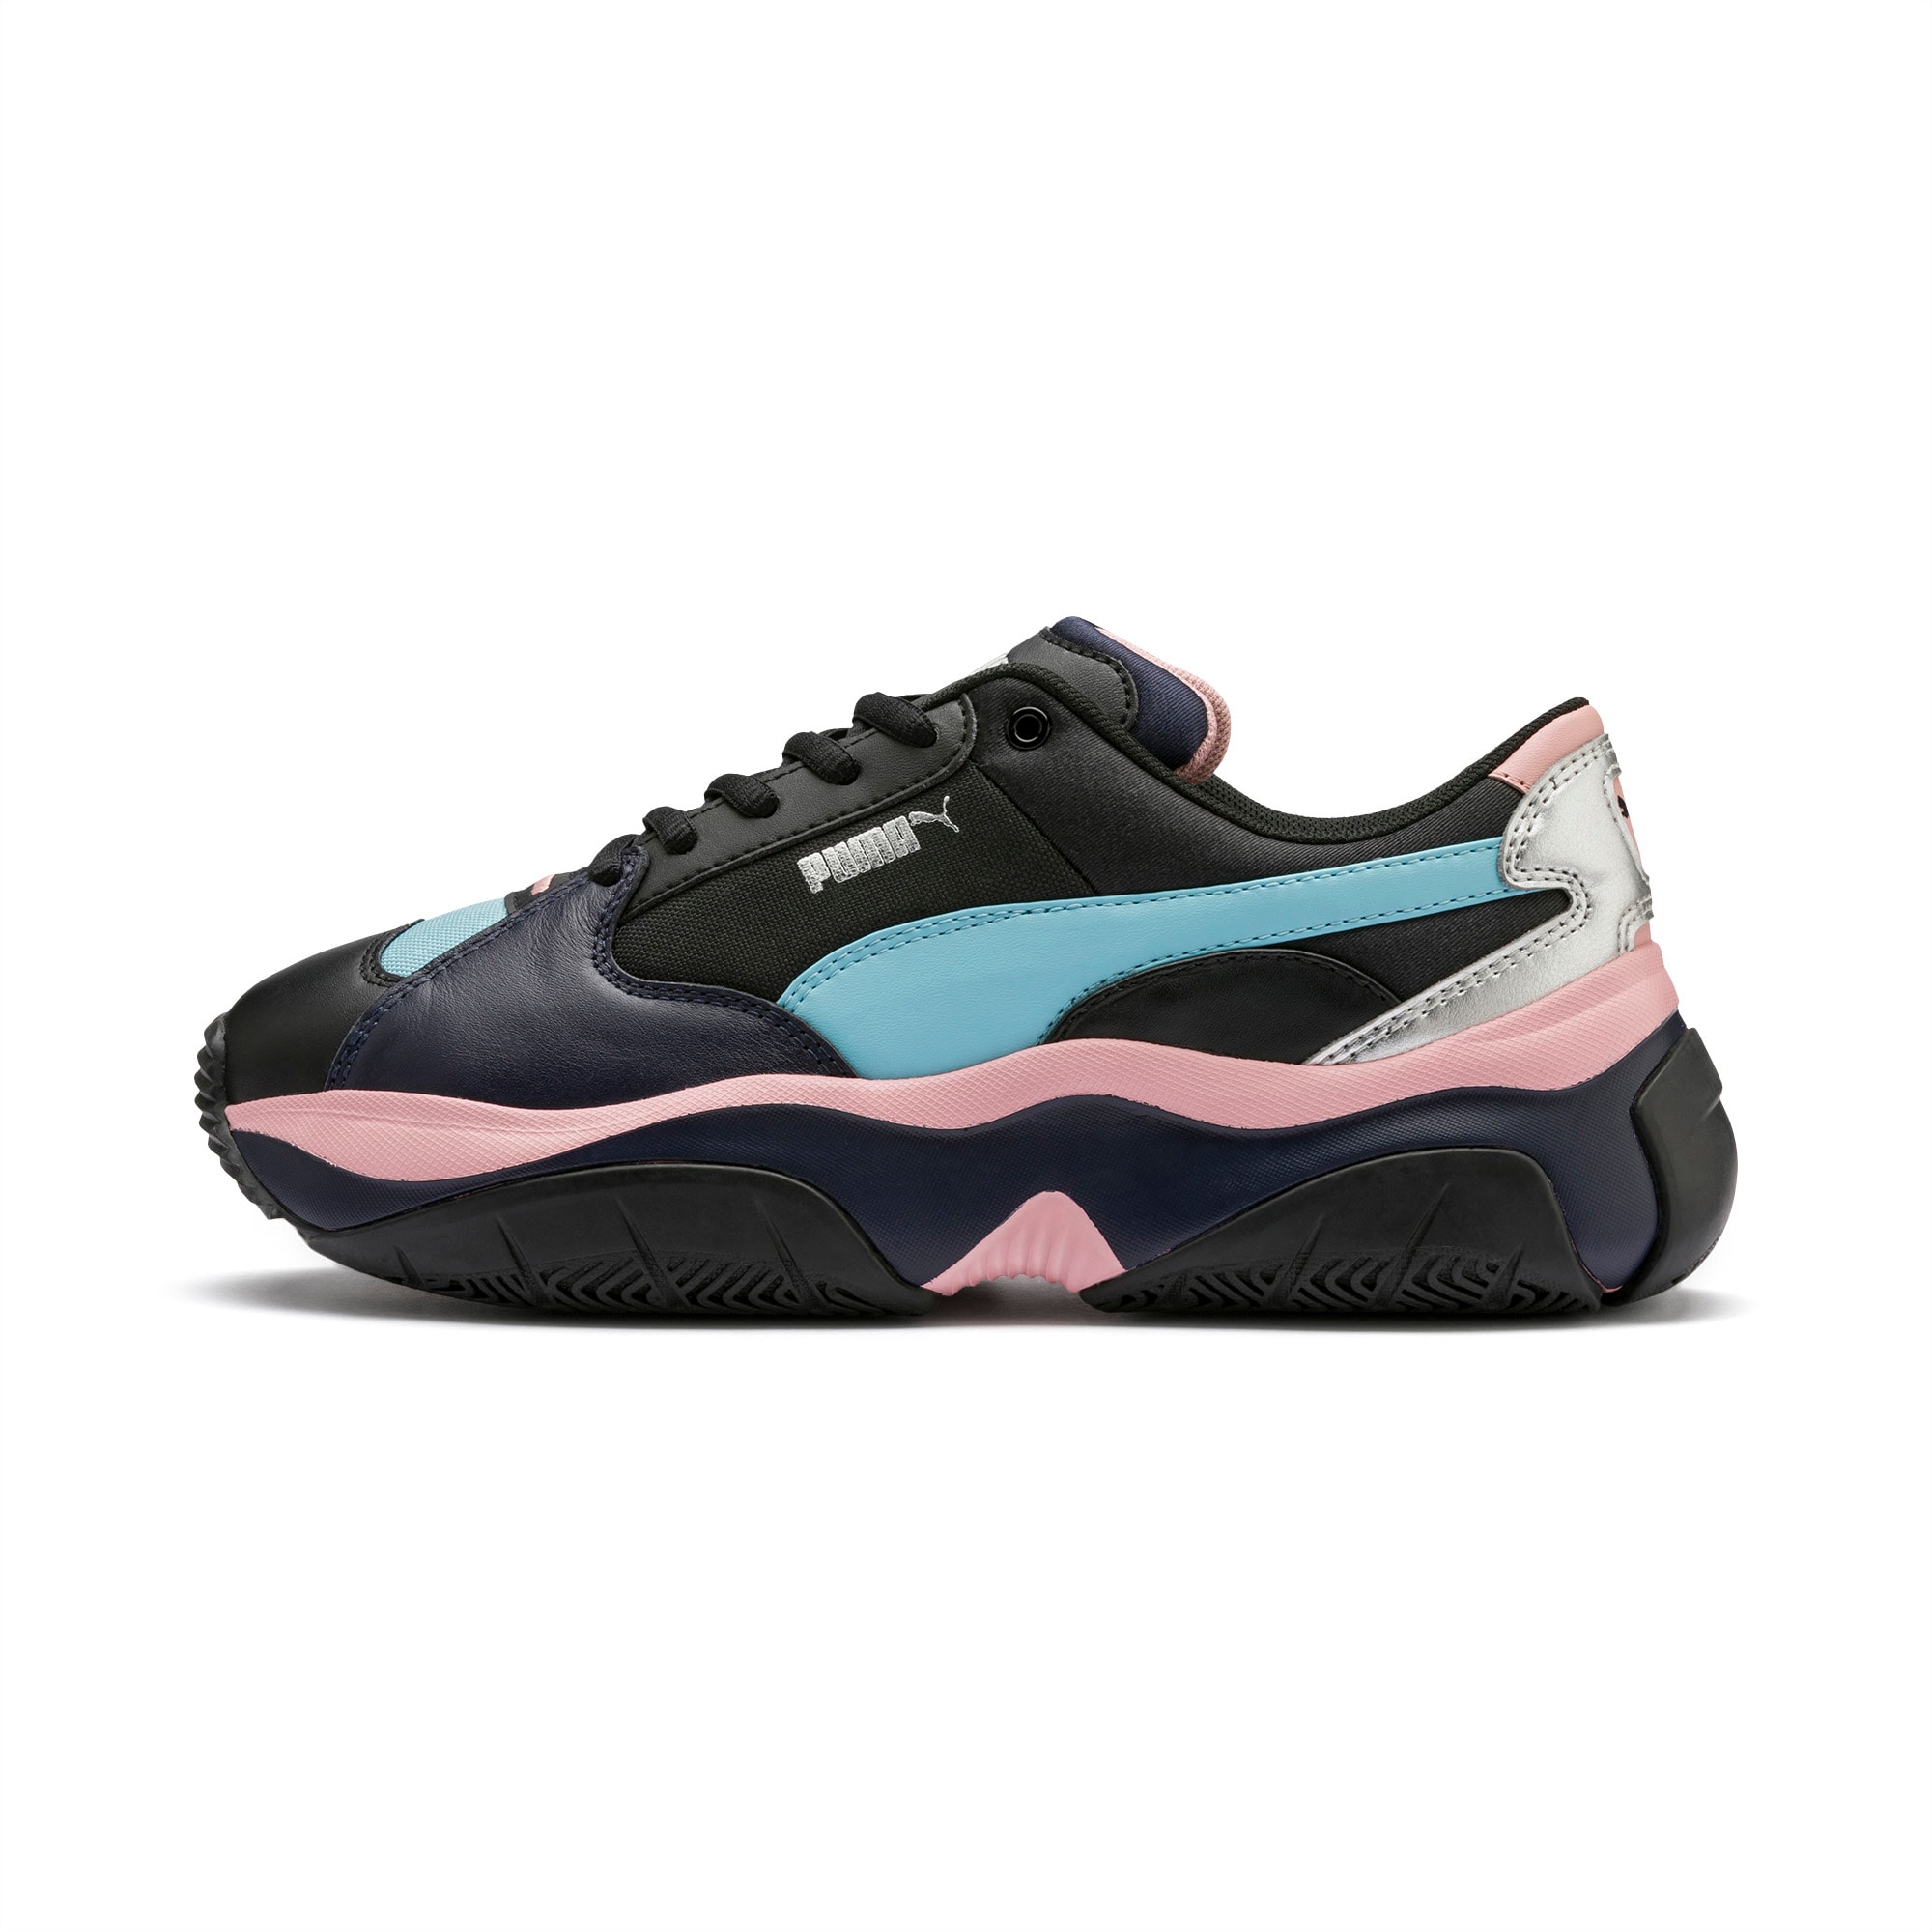 puma black and pink trainers